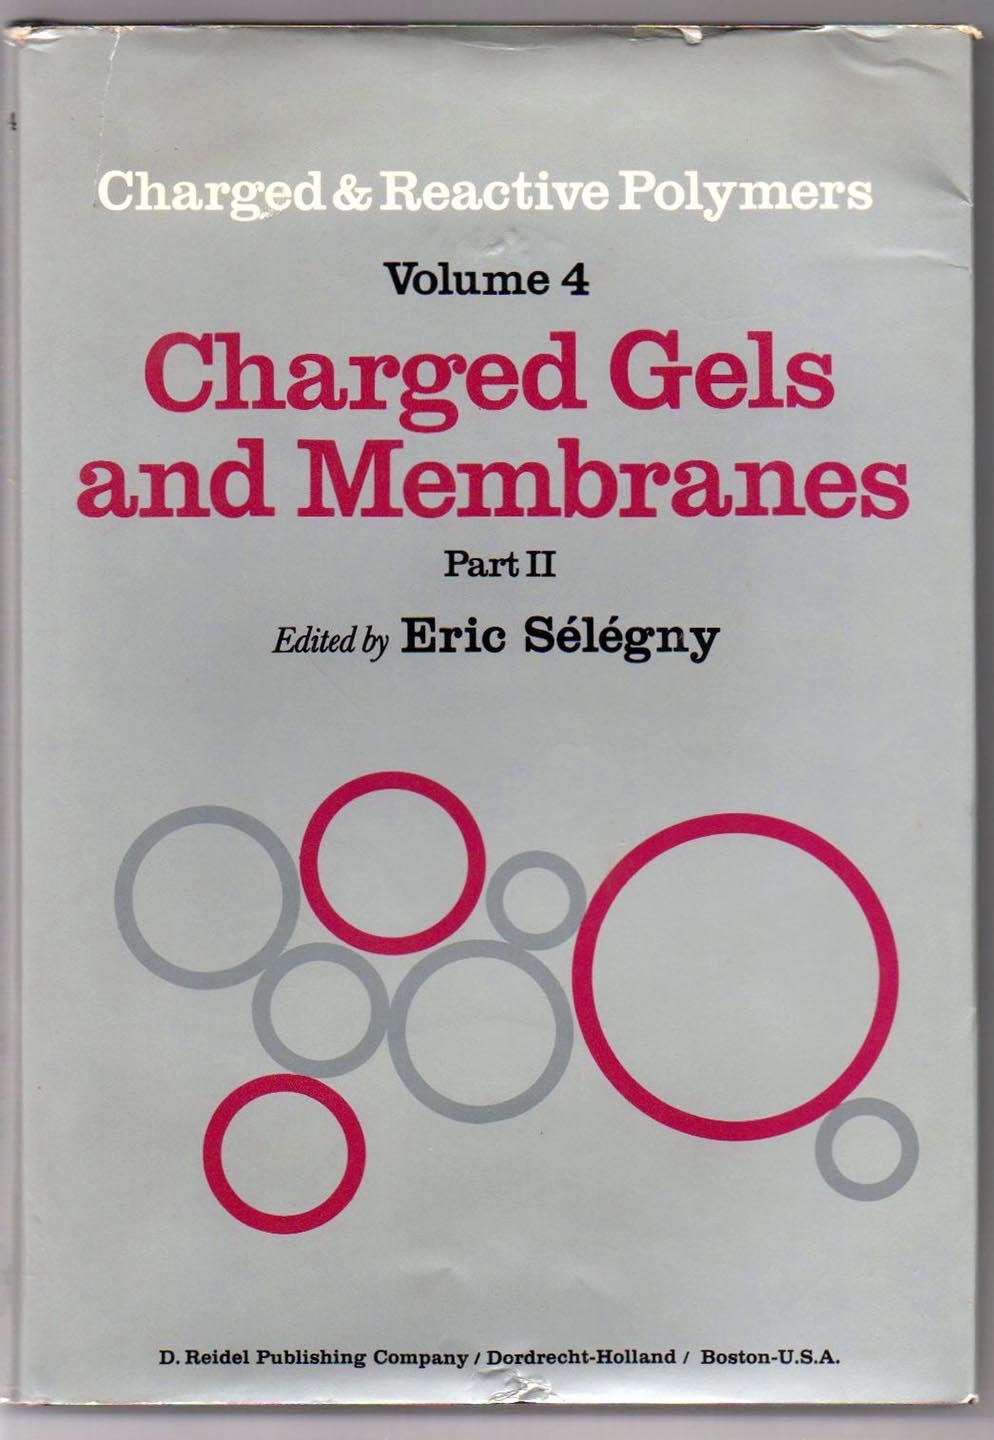 Charged Gels and Membranes Part II